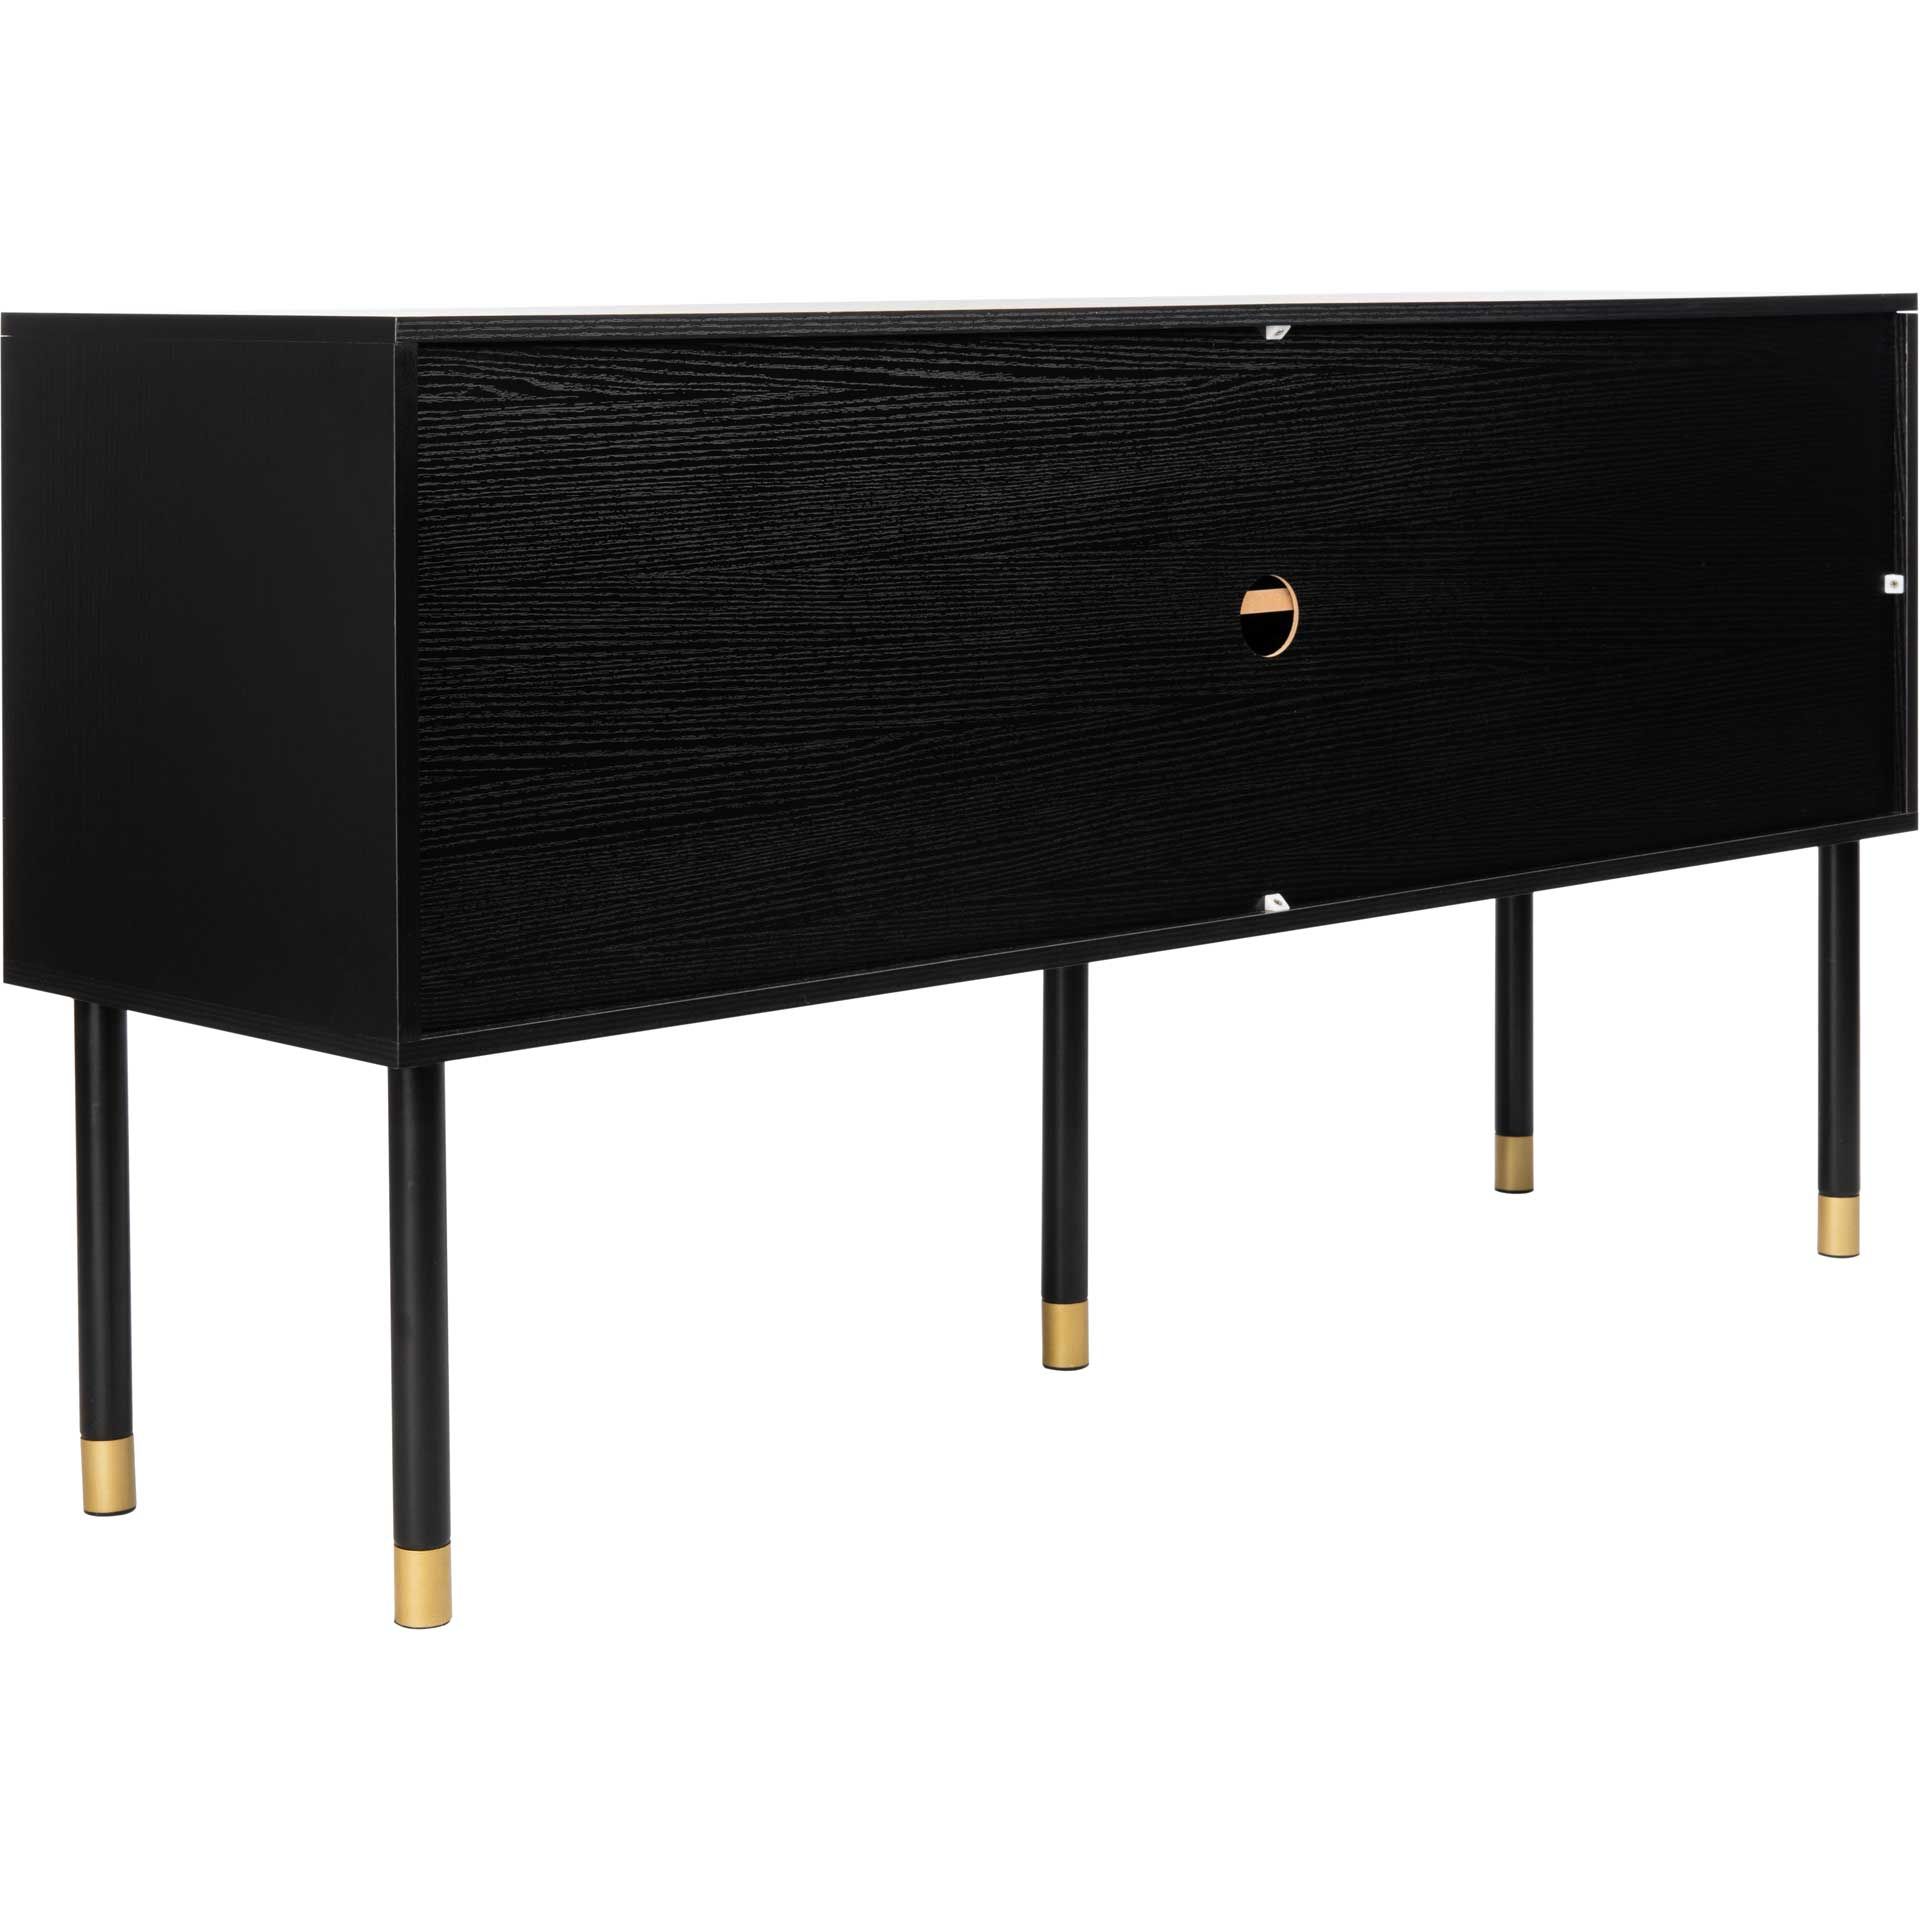 Oaklee Tv Stand Black/white/gold – Froy Throughout Oaklee Tv Stands (Gallery 3 of 20)